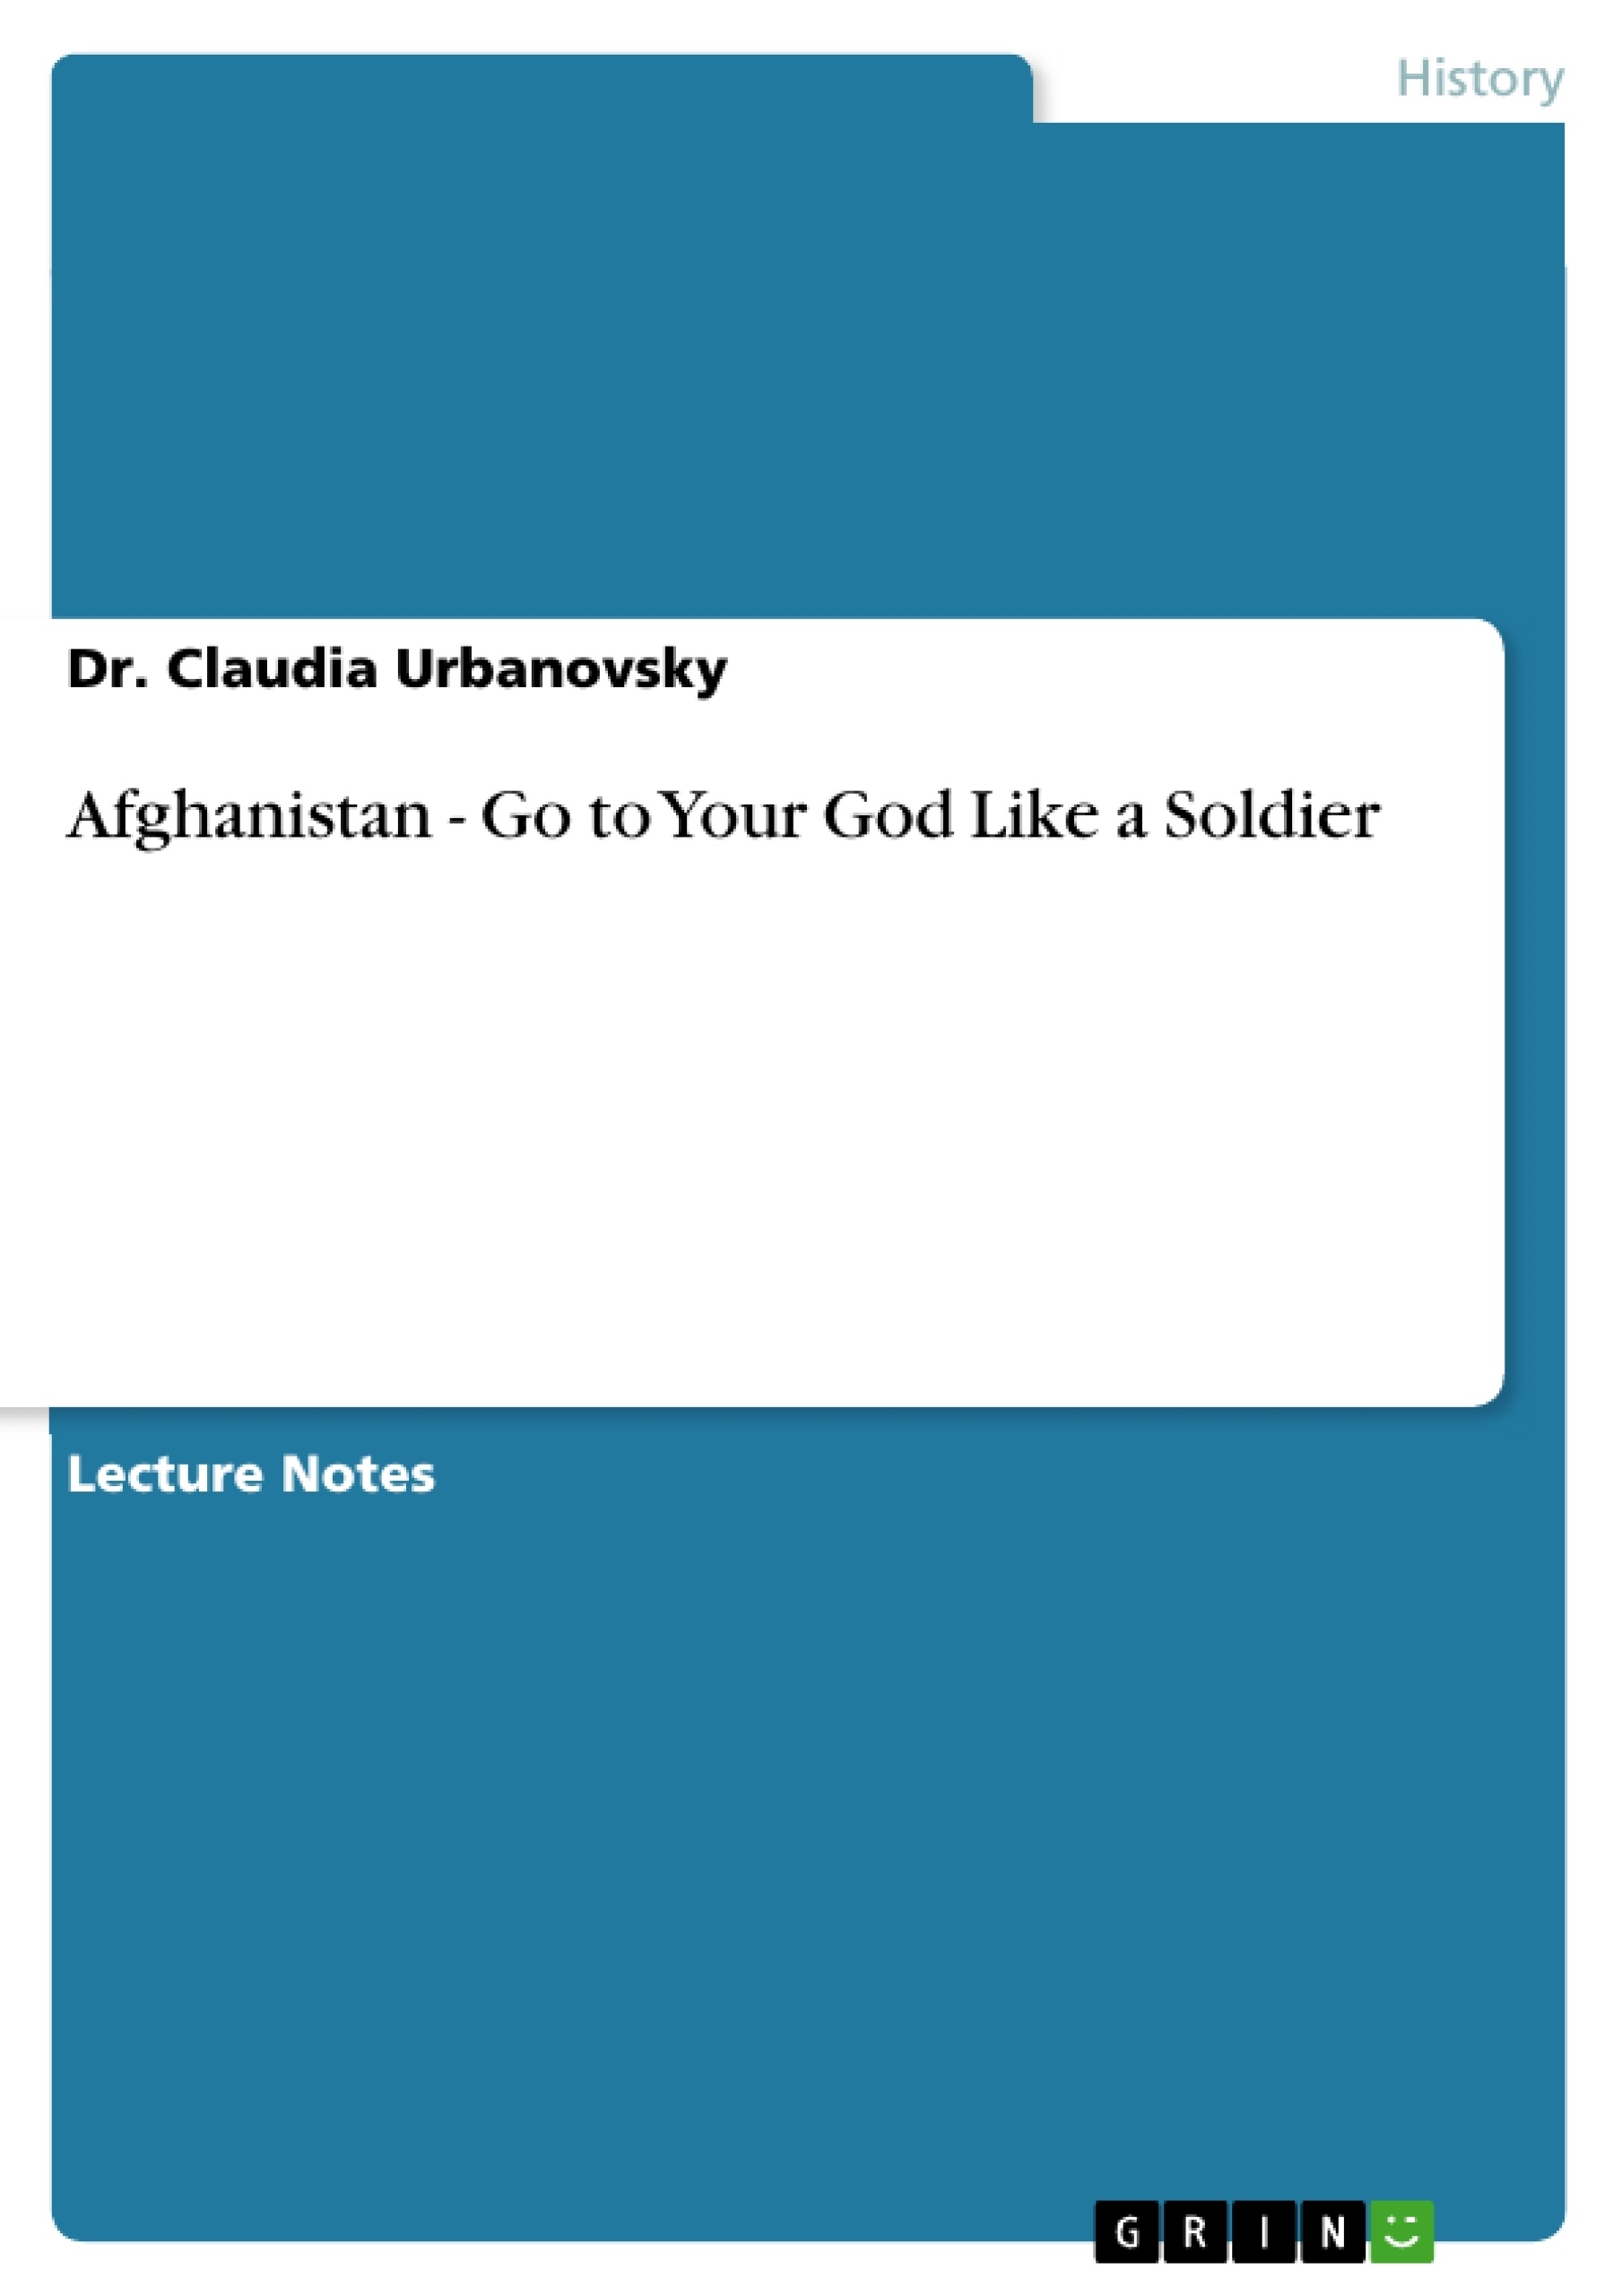 Title: Afghanistan - Go to Your God Like a Soldier